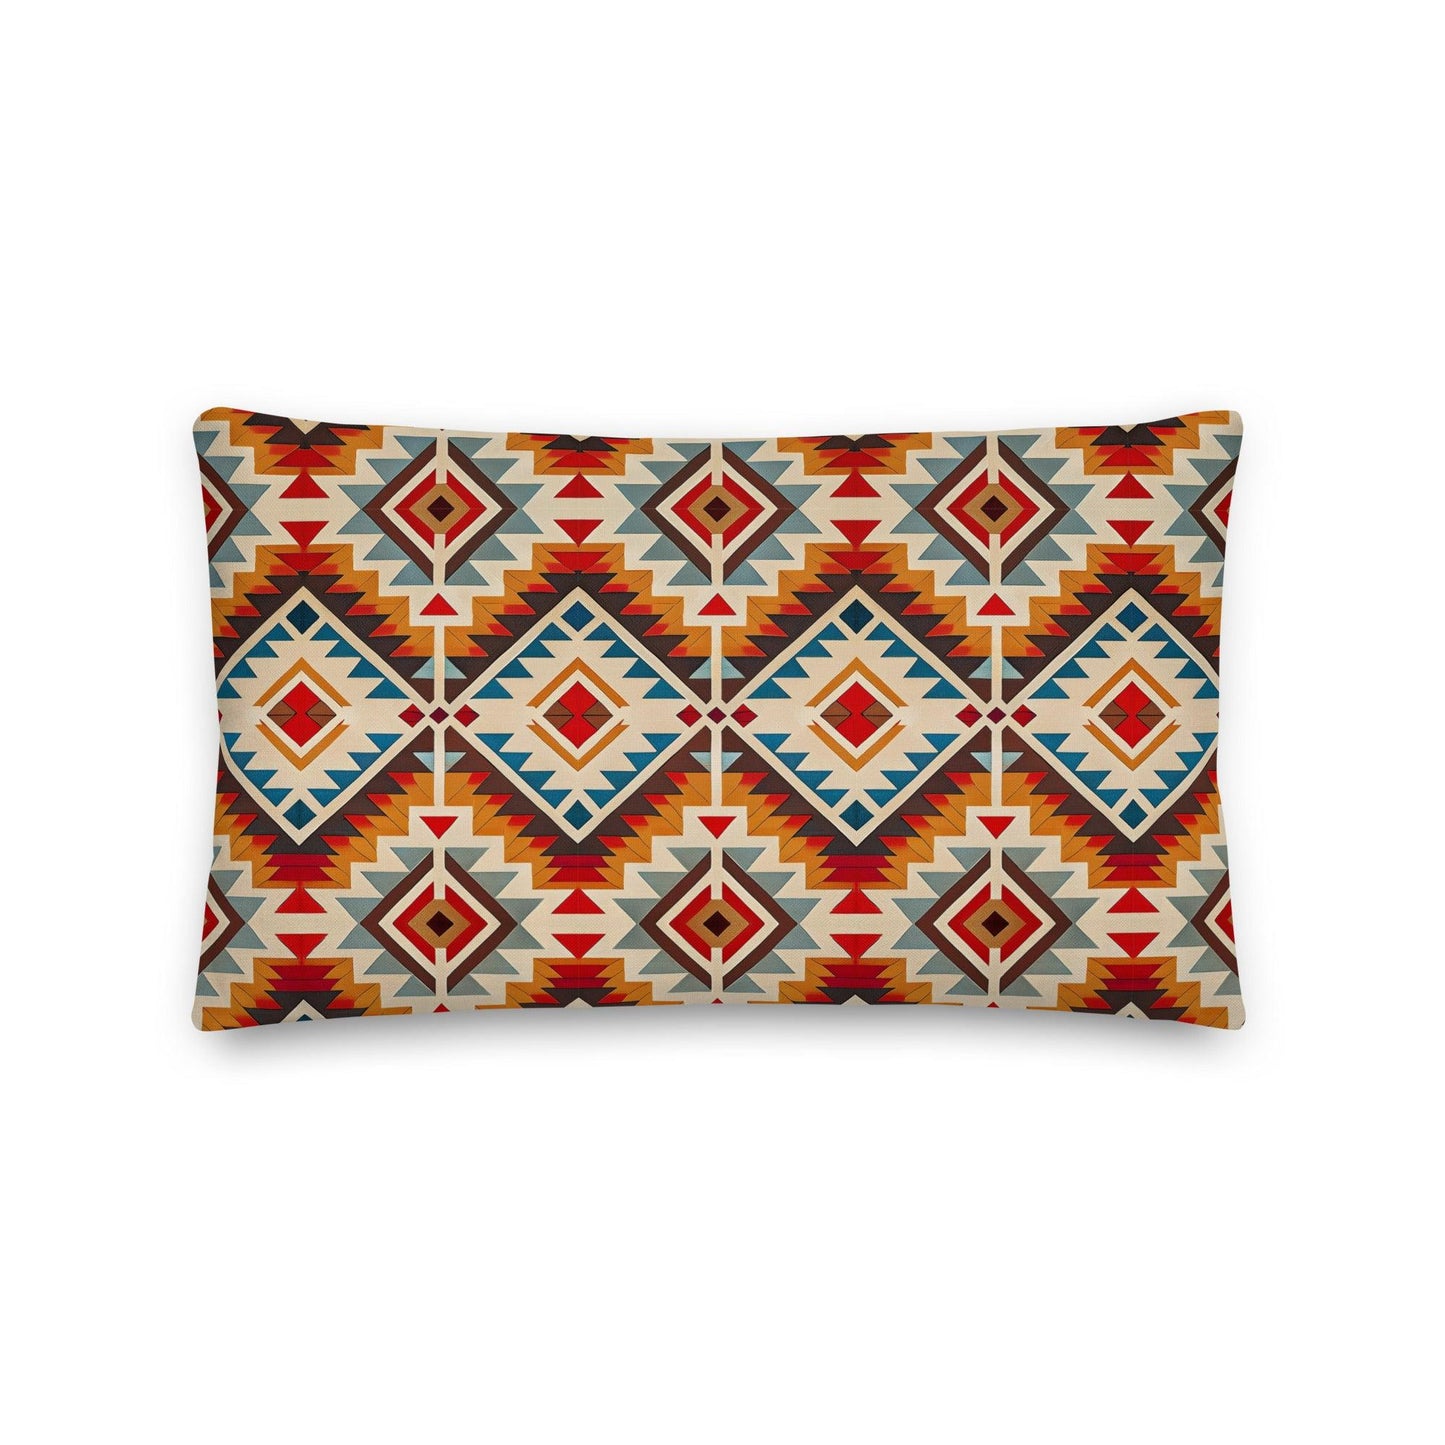 Native American Sunset Throw Pillow - The Global Wanderer